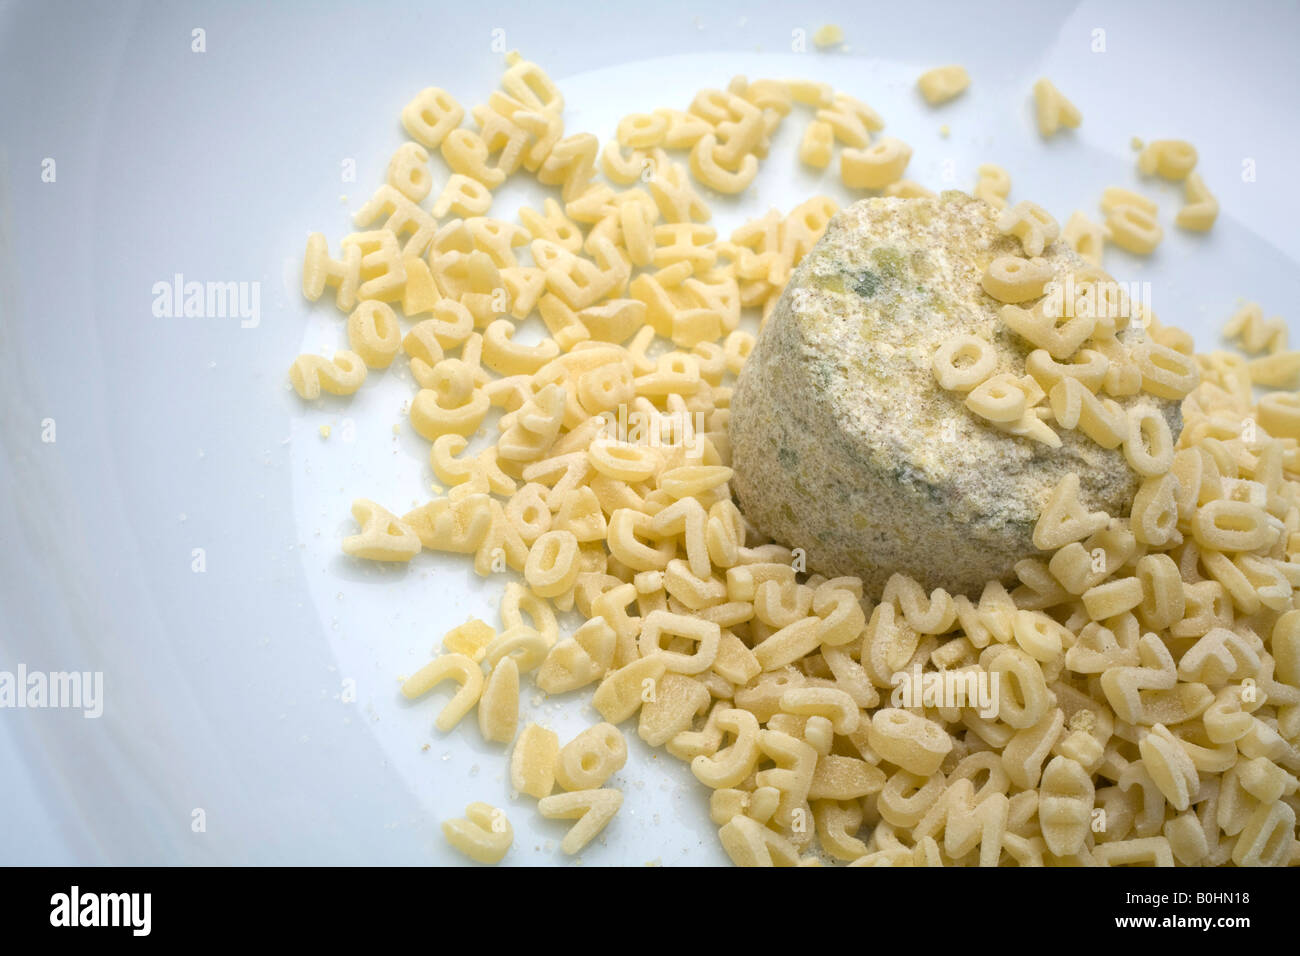 Lump of dry instant soup on a plate surrounded by alphabet noodles Stock Photo